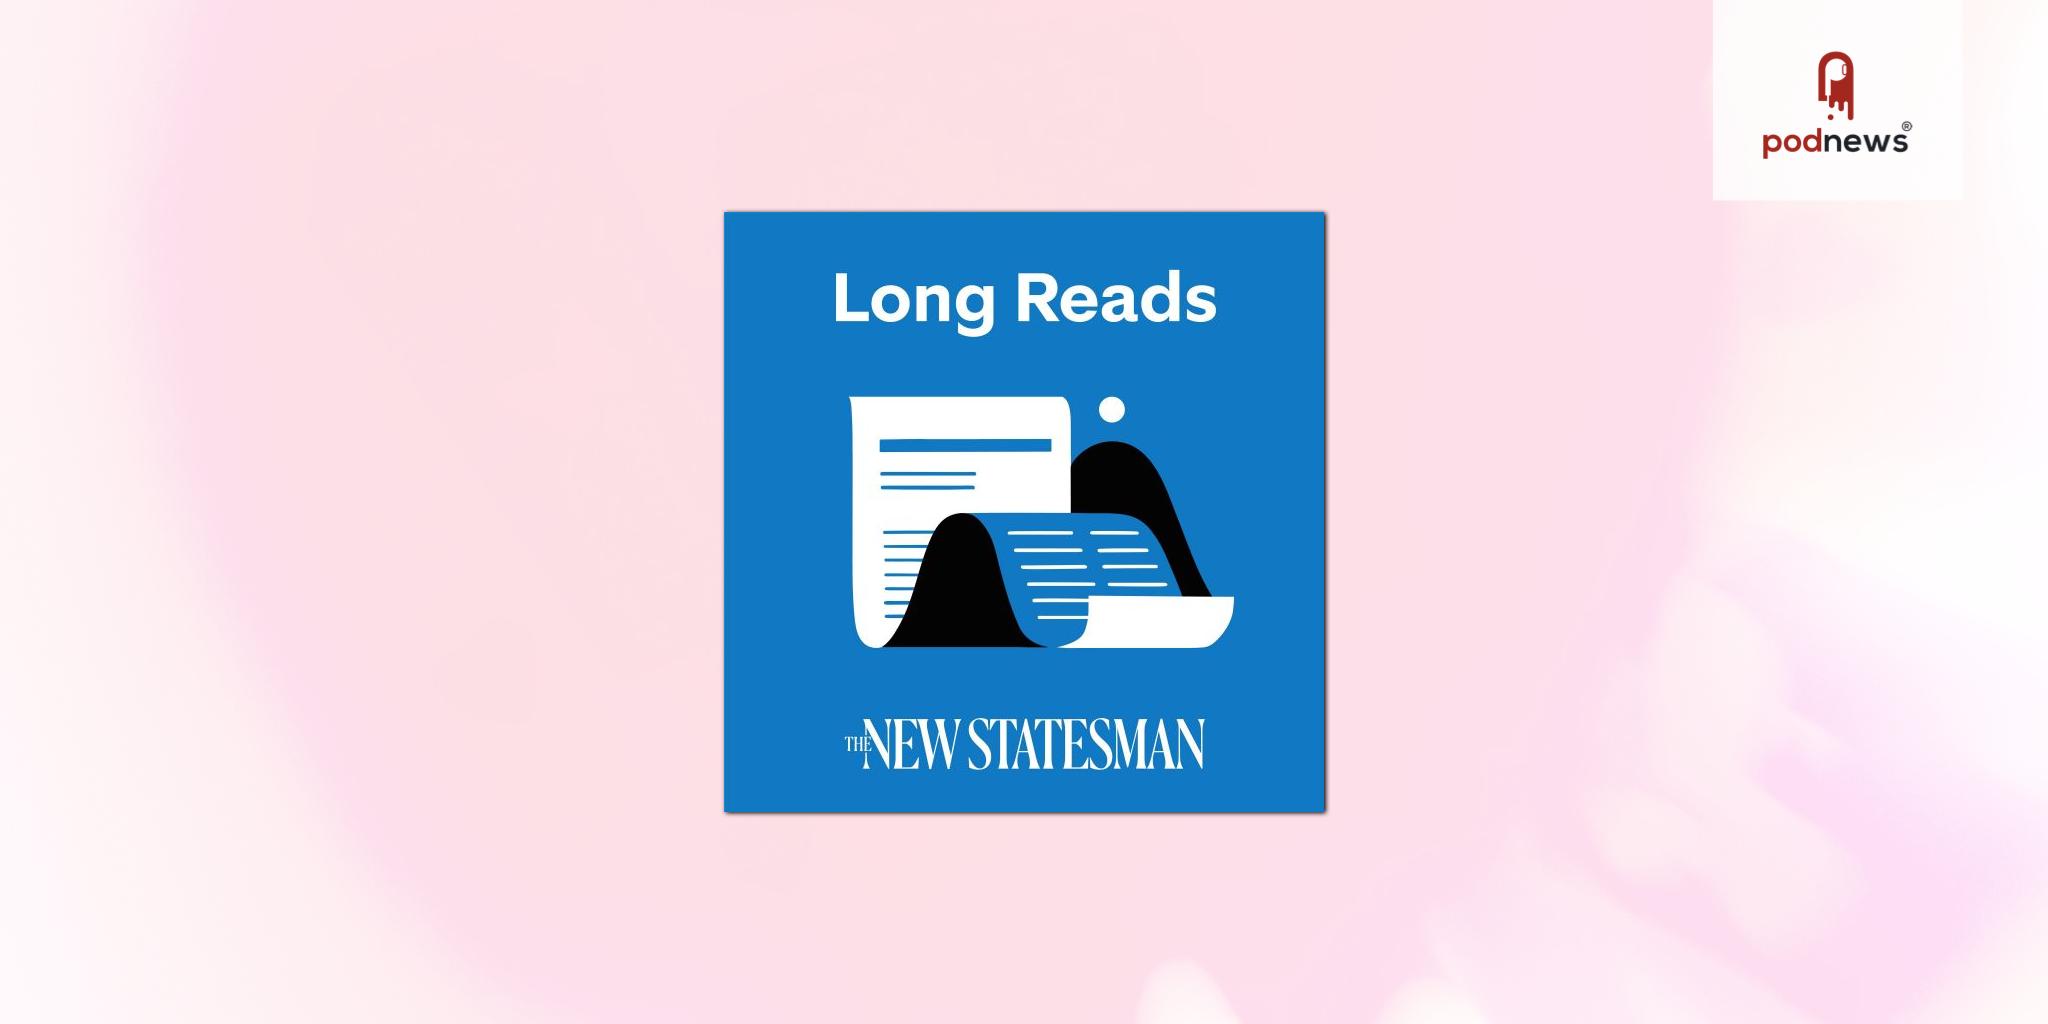 New Statesman launches Long Reads podcast following record-breaking audio growth